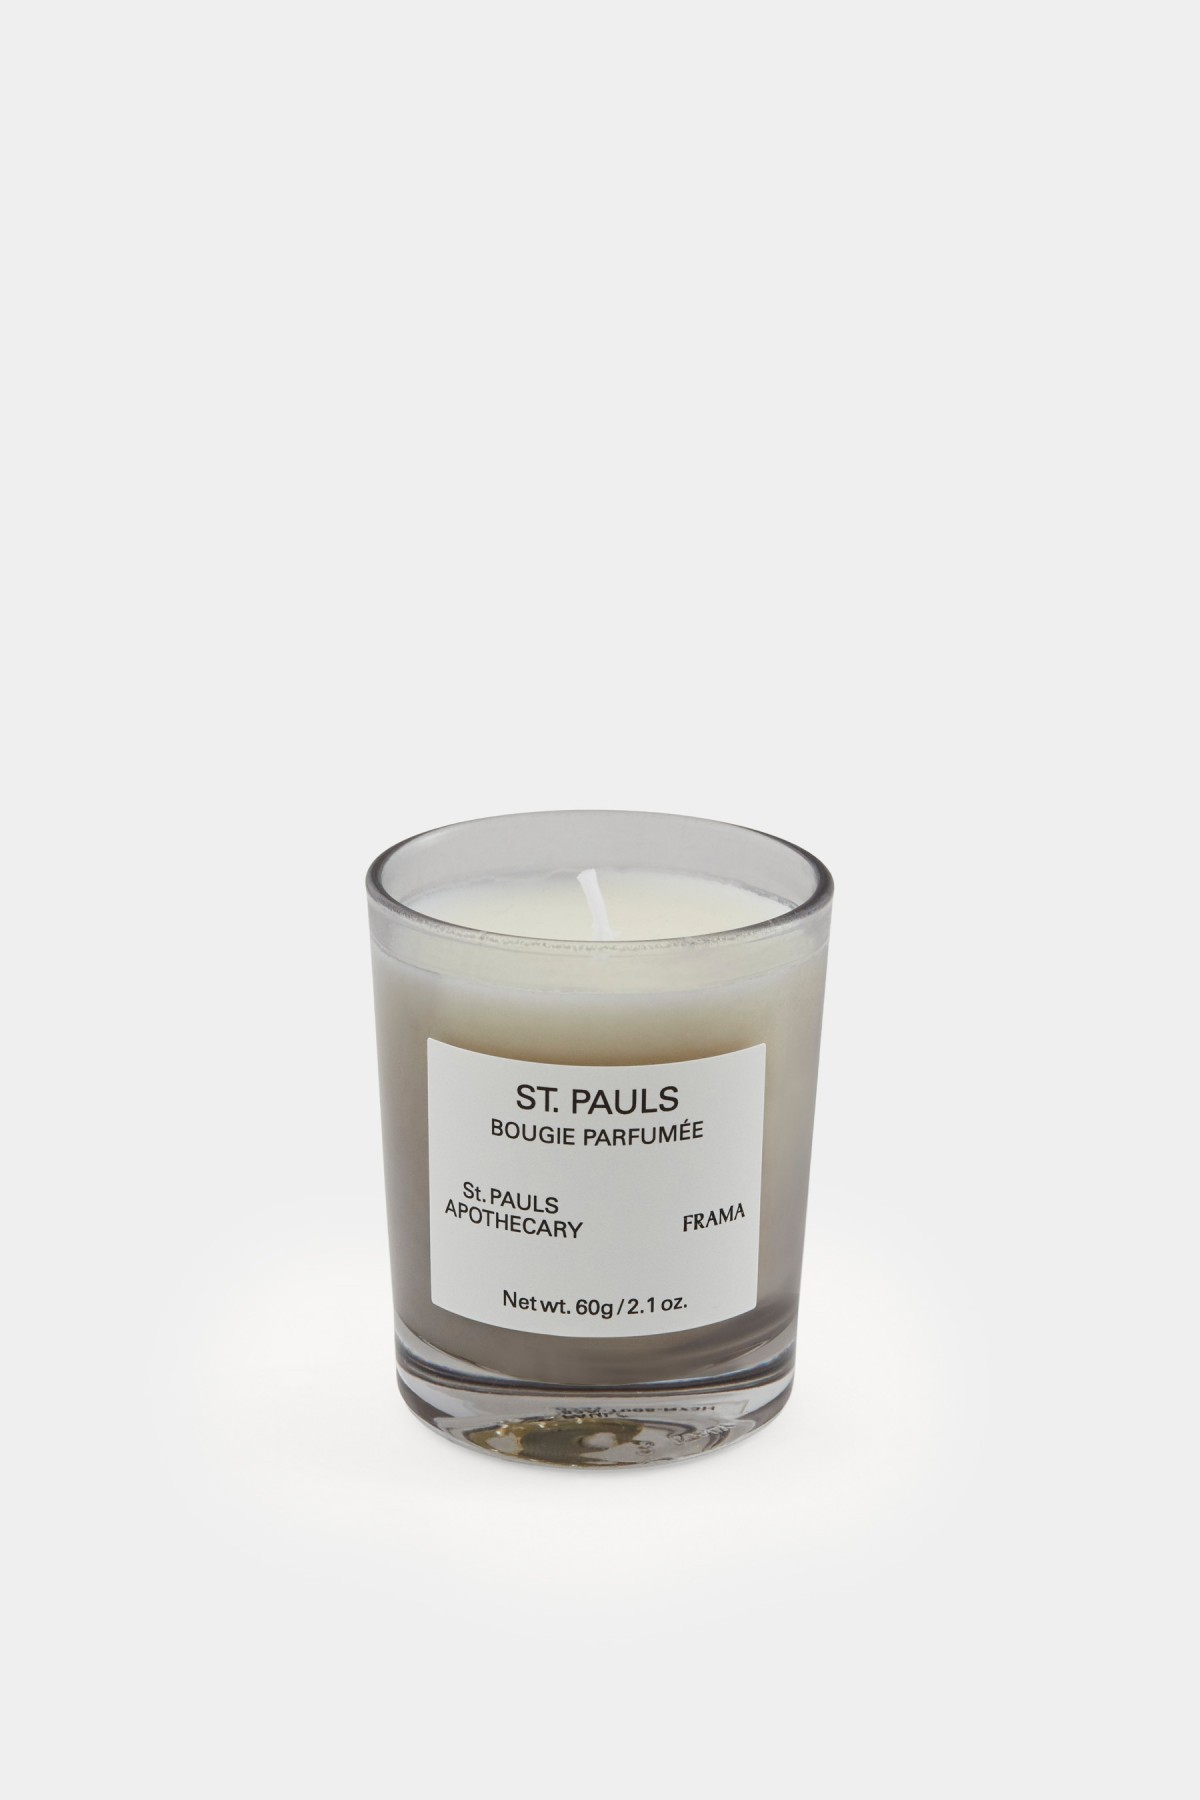 Frama Scented Candle 60 g in St. Pauls